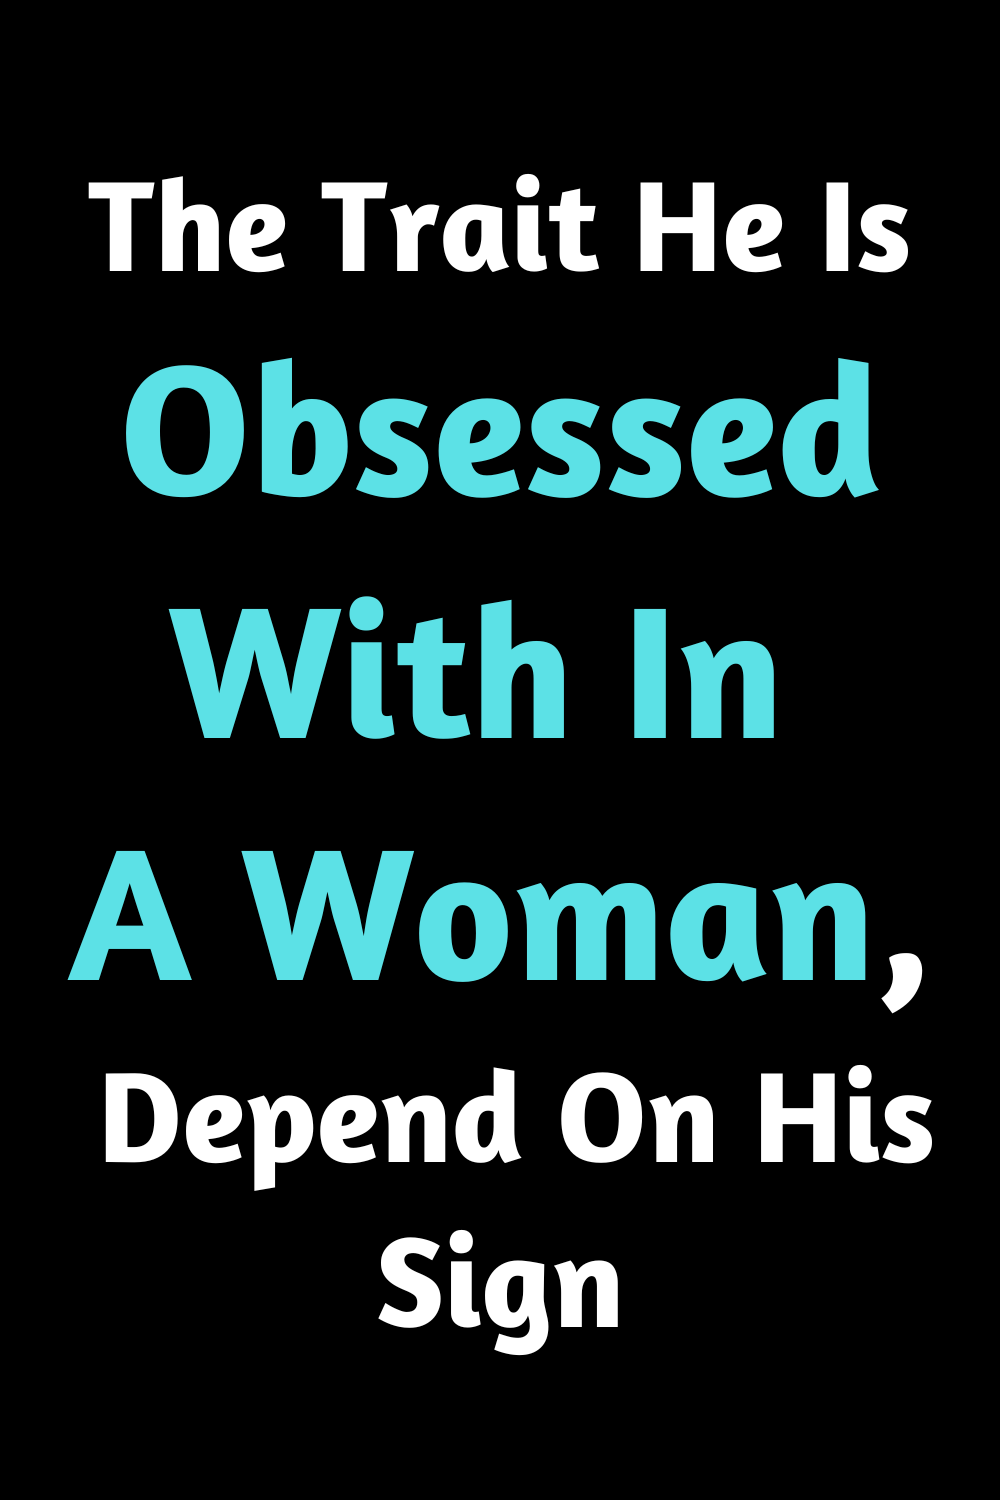 The Trait He Is Obsessed With In A Woman, Depend On His Sign